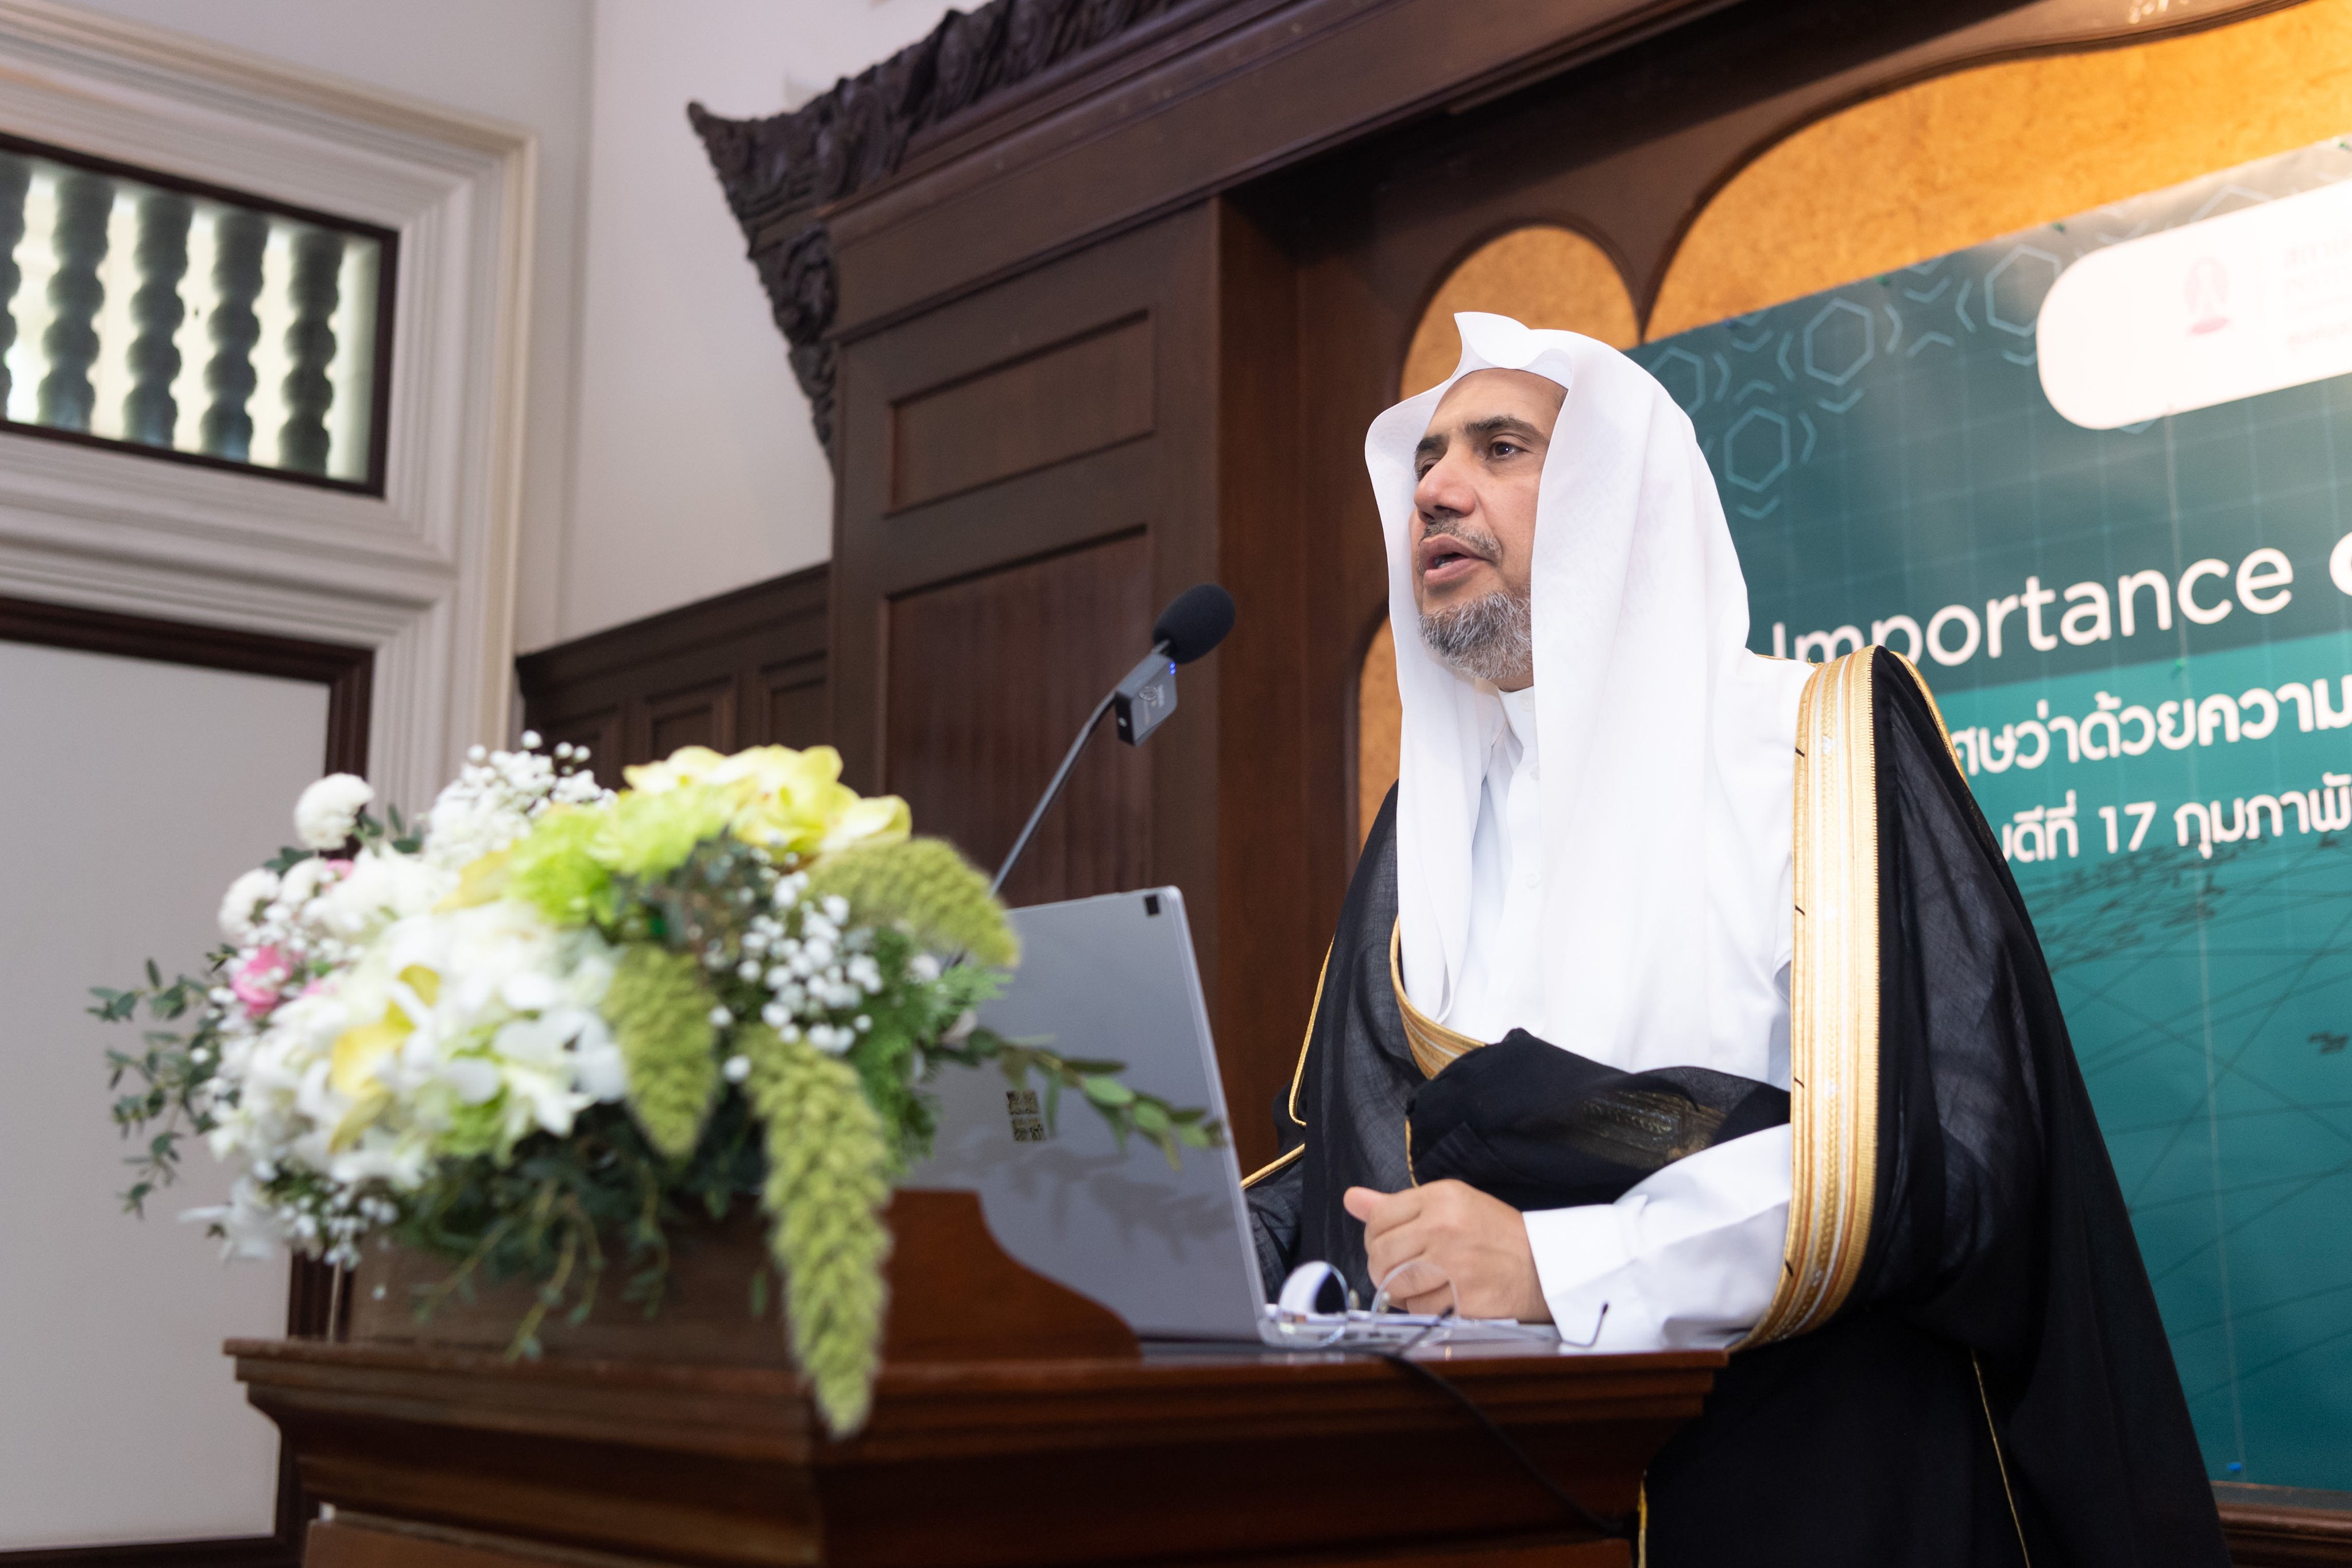 His Excellency Dr. Mohammad Alissa gave a lecture this morning called, "The Alliance of Civilizations," at Kings University